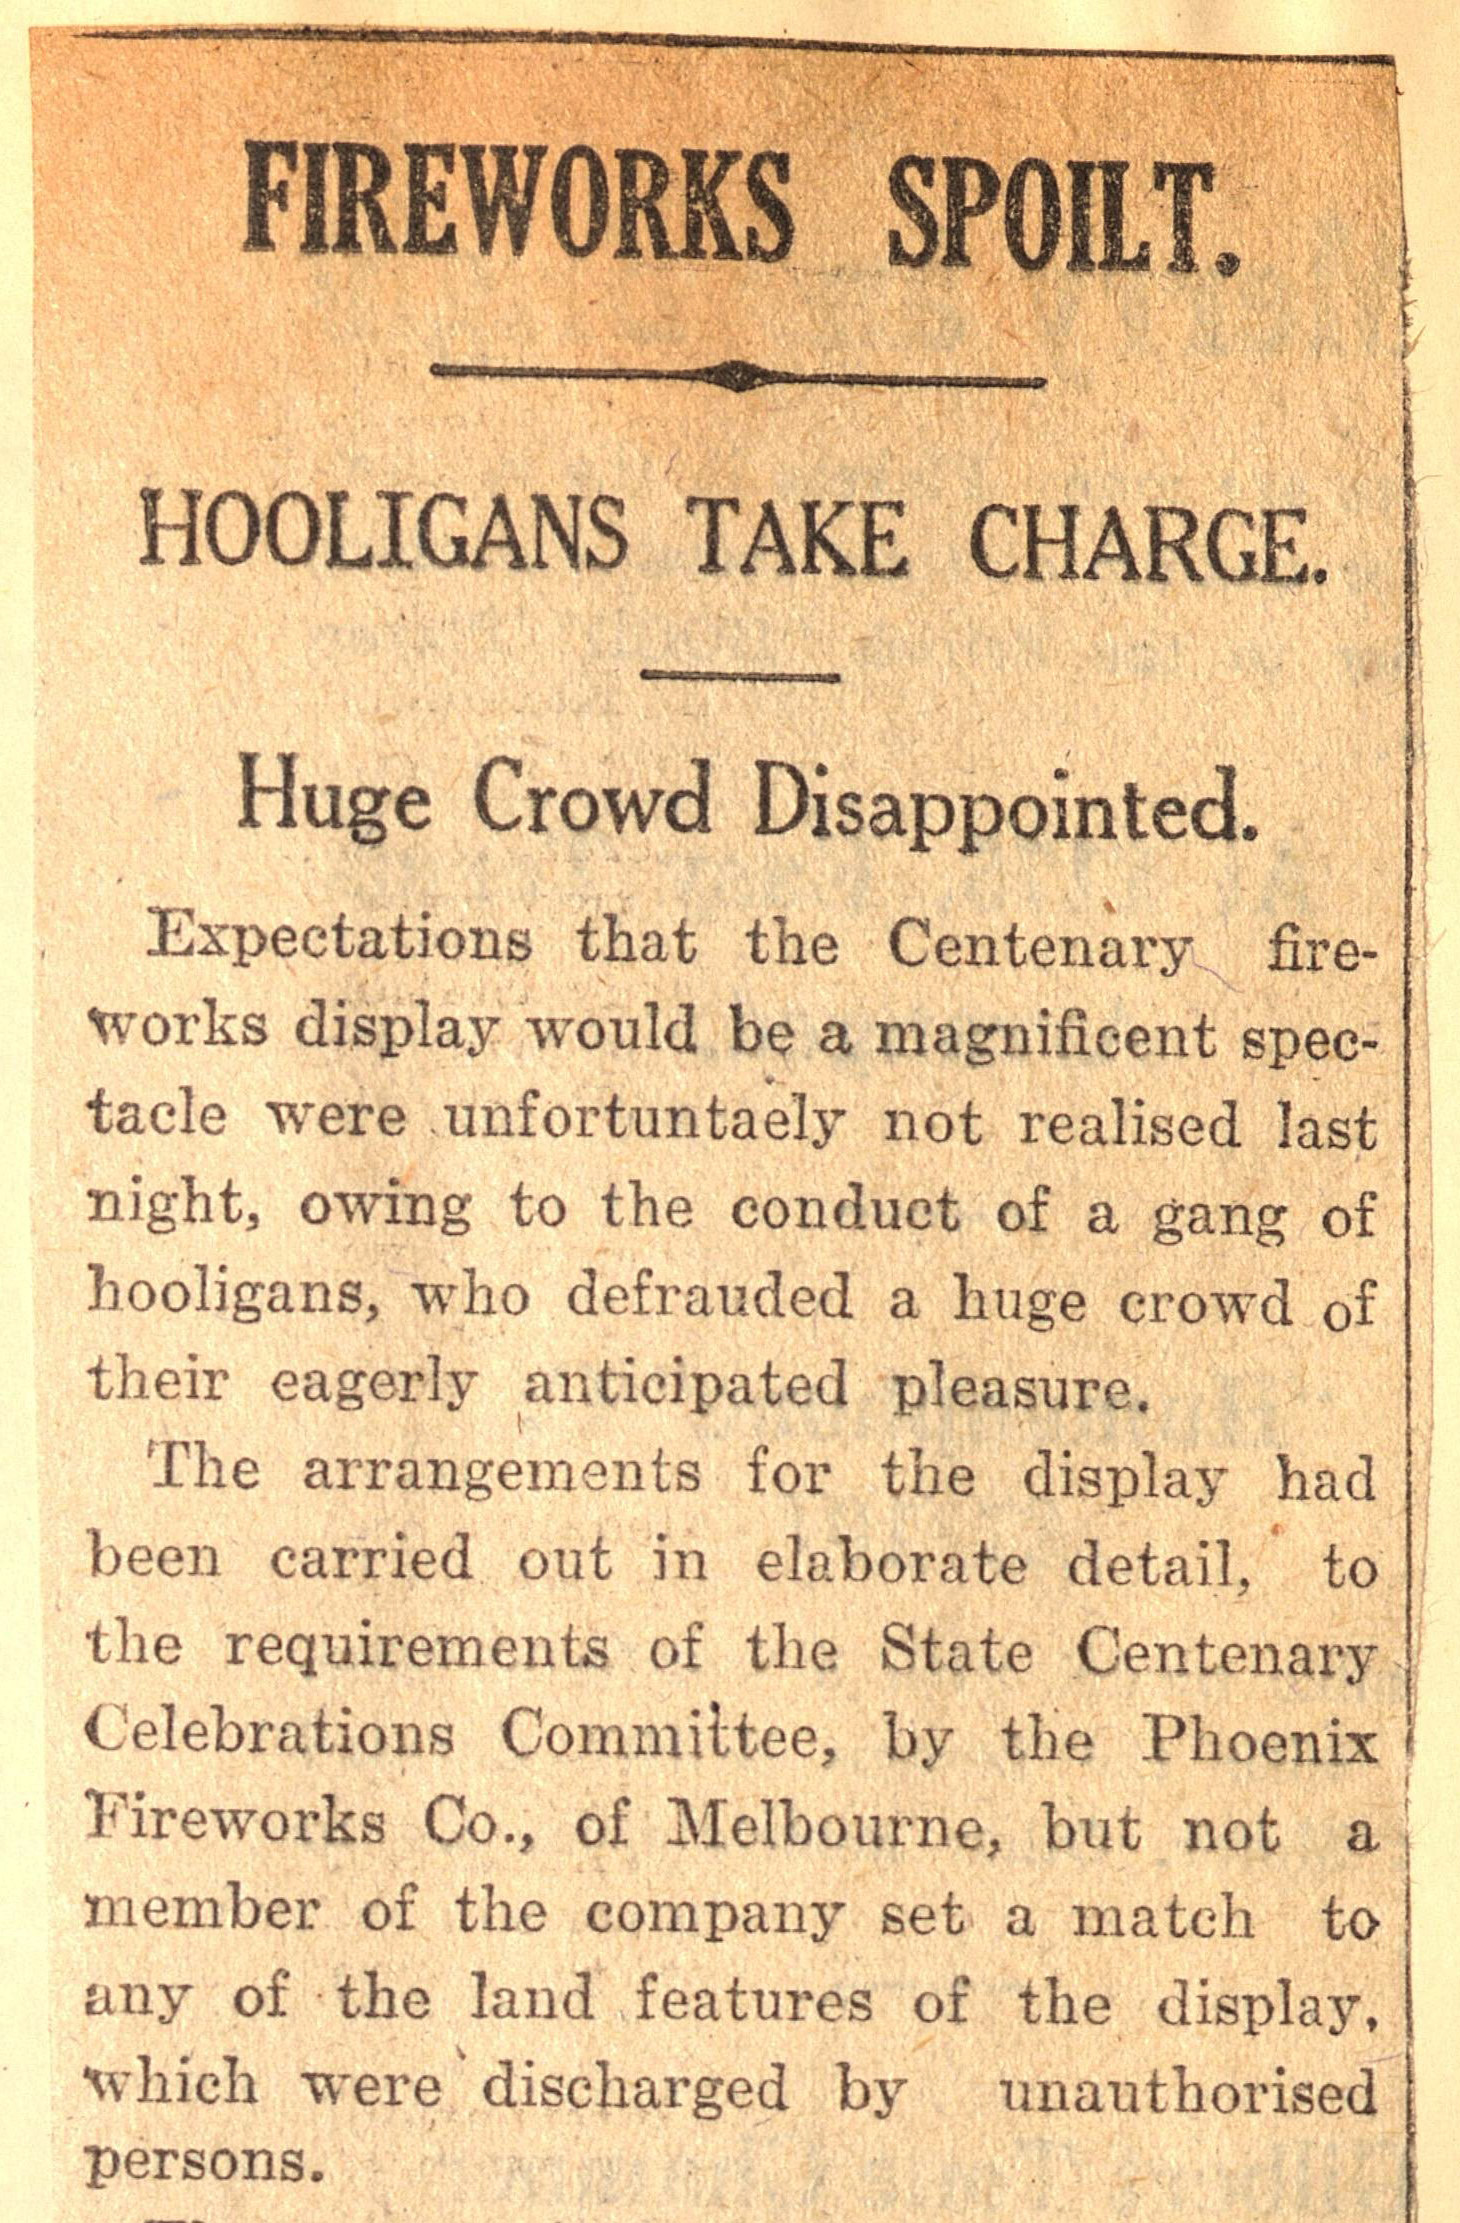 1929 newspaper article on the ruined fireworks